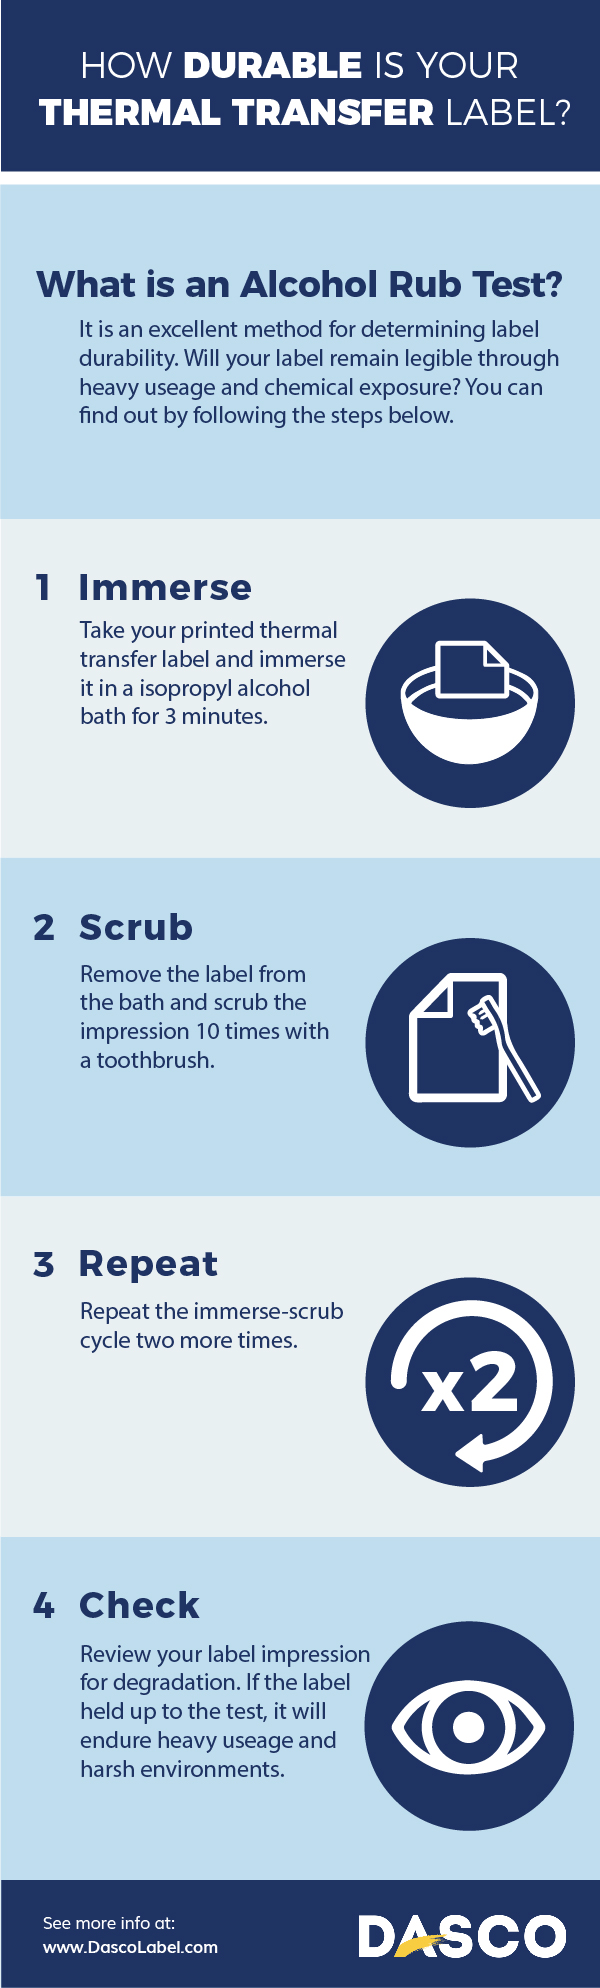 Infographic showing label marking durability test steps